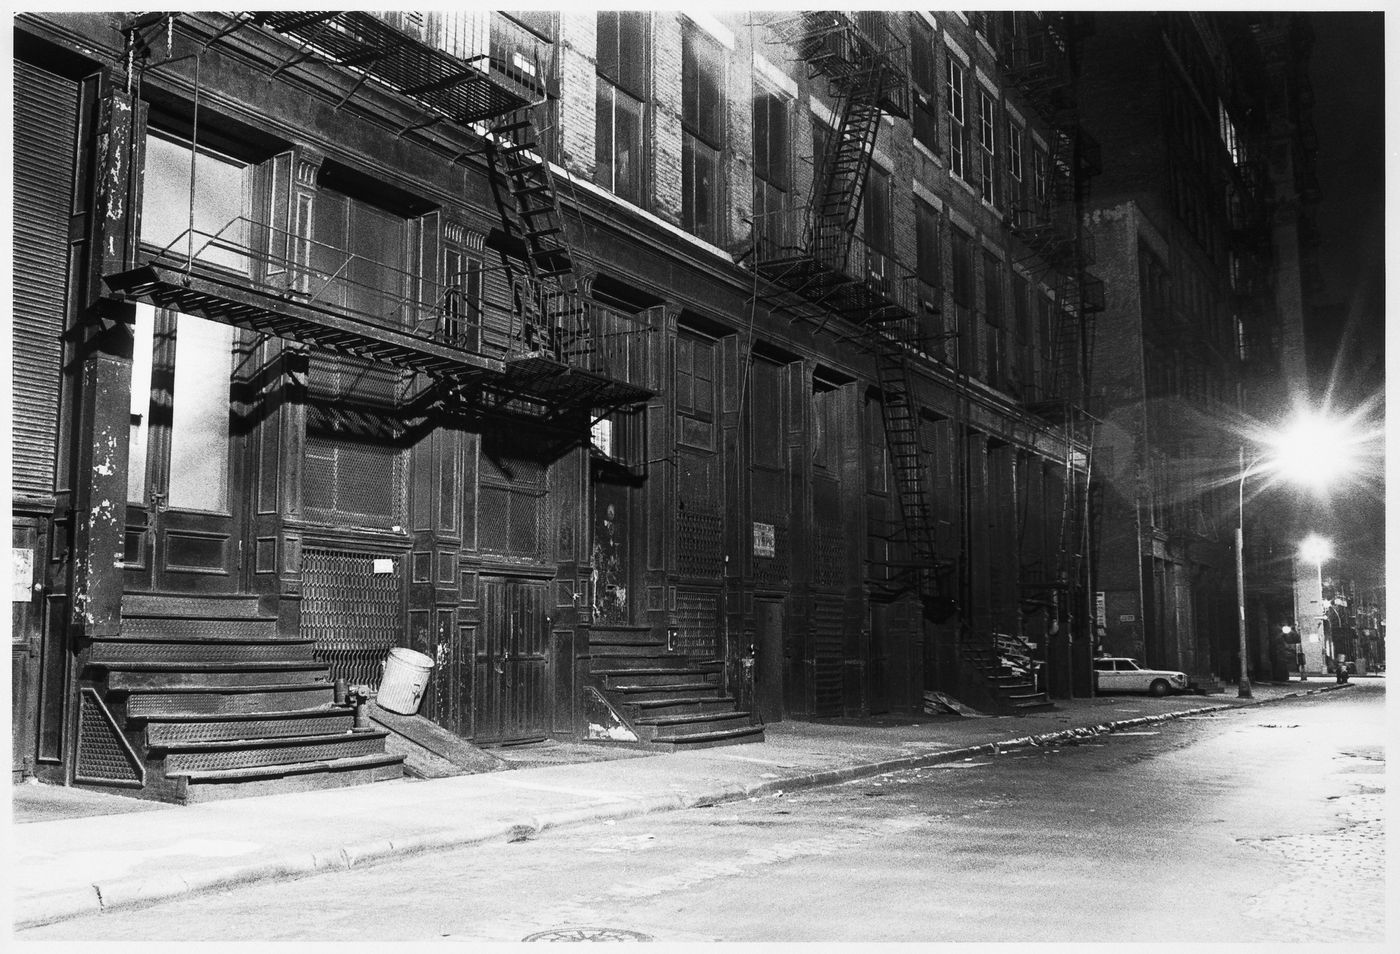 View of apartment houses at night in Soho showing fire escapes, New York City, New York